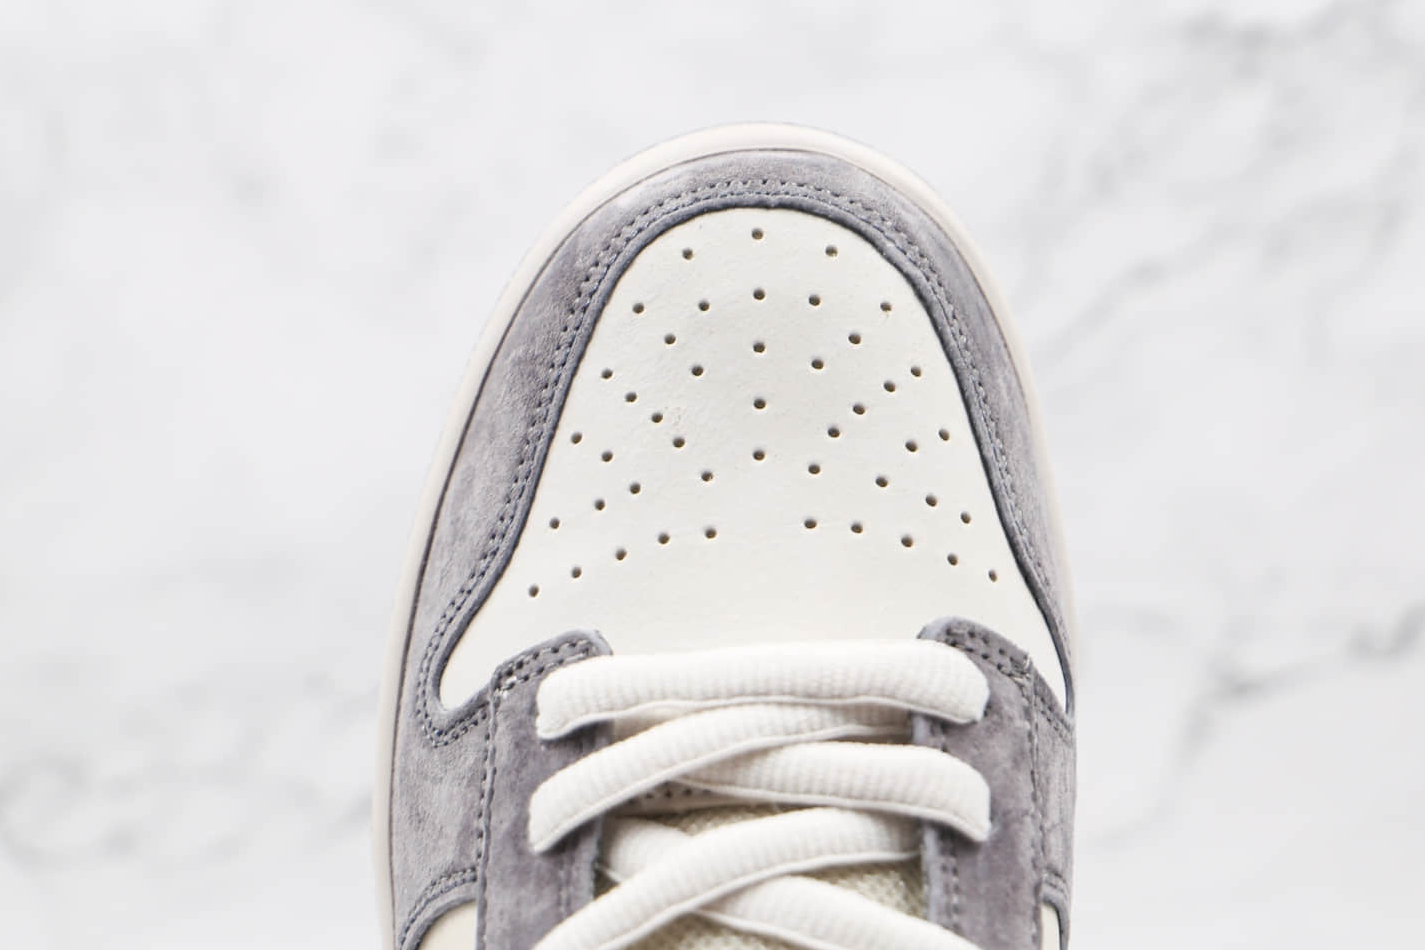 Nike SB Dunk Low Pro Grey Month White Shoes 854866-002 - Stylish and Versatile Footwear for Men